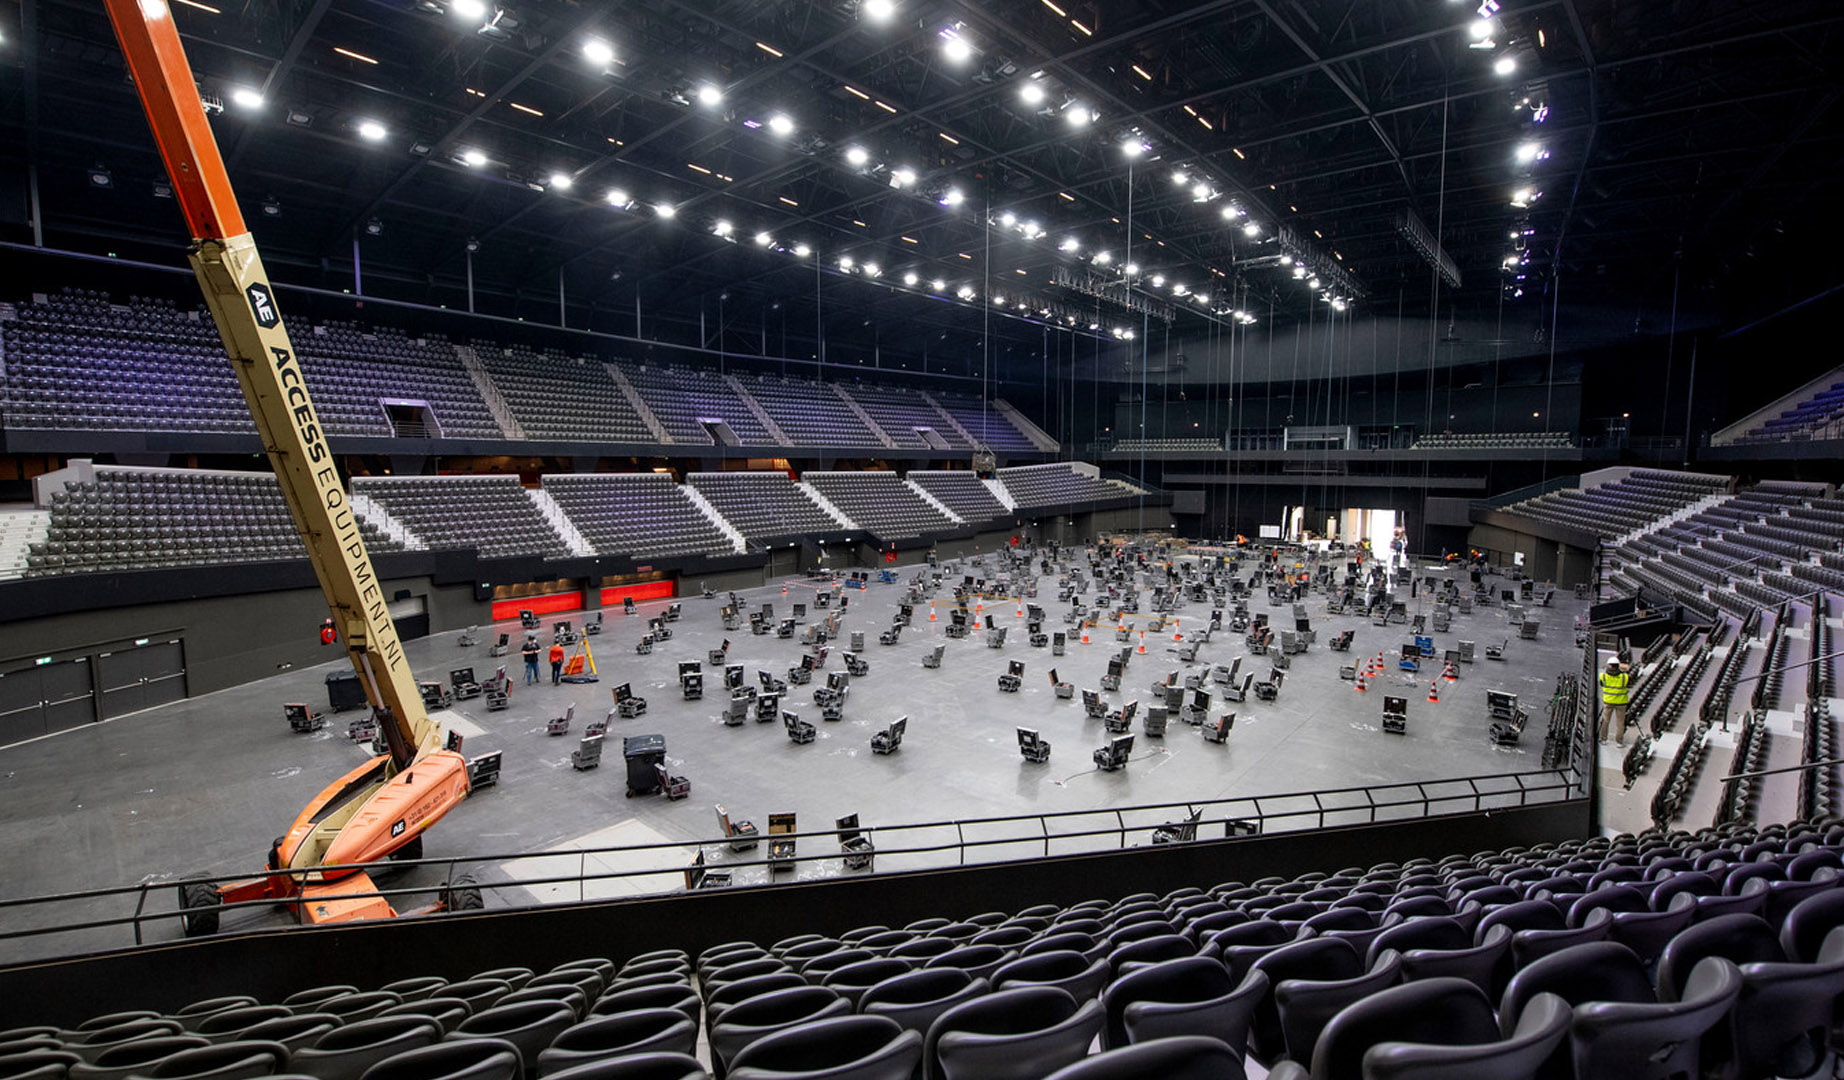 Eurovision 2021: The Eurovision Song Contest is the biggest event Rotterdam Ahoy has ever hosted